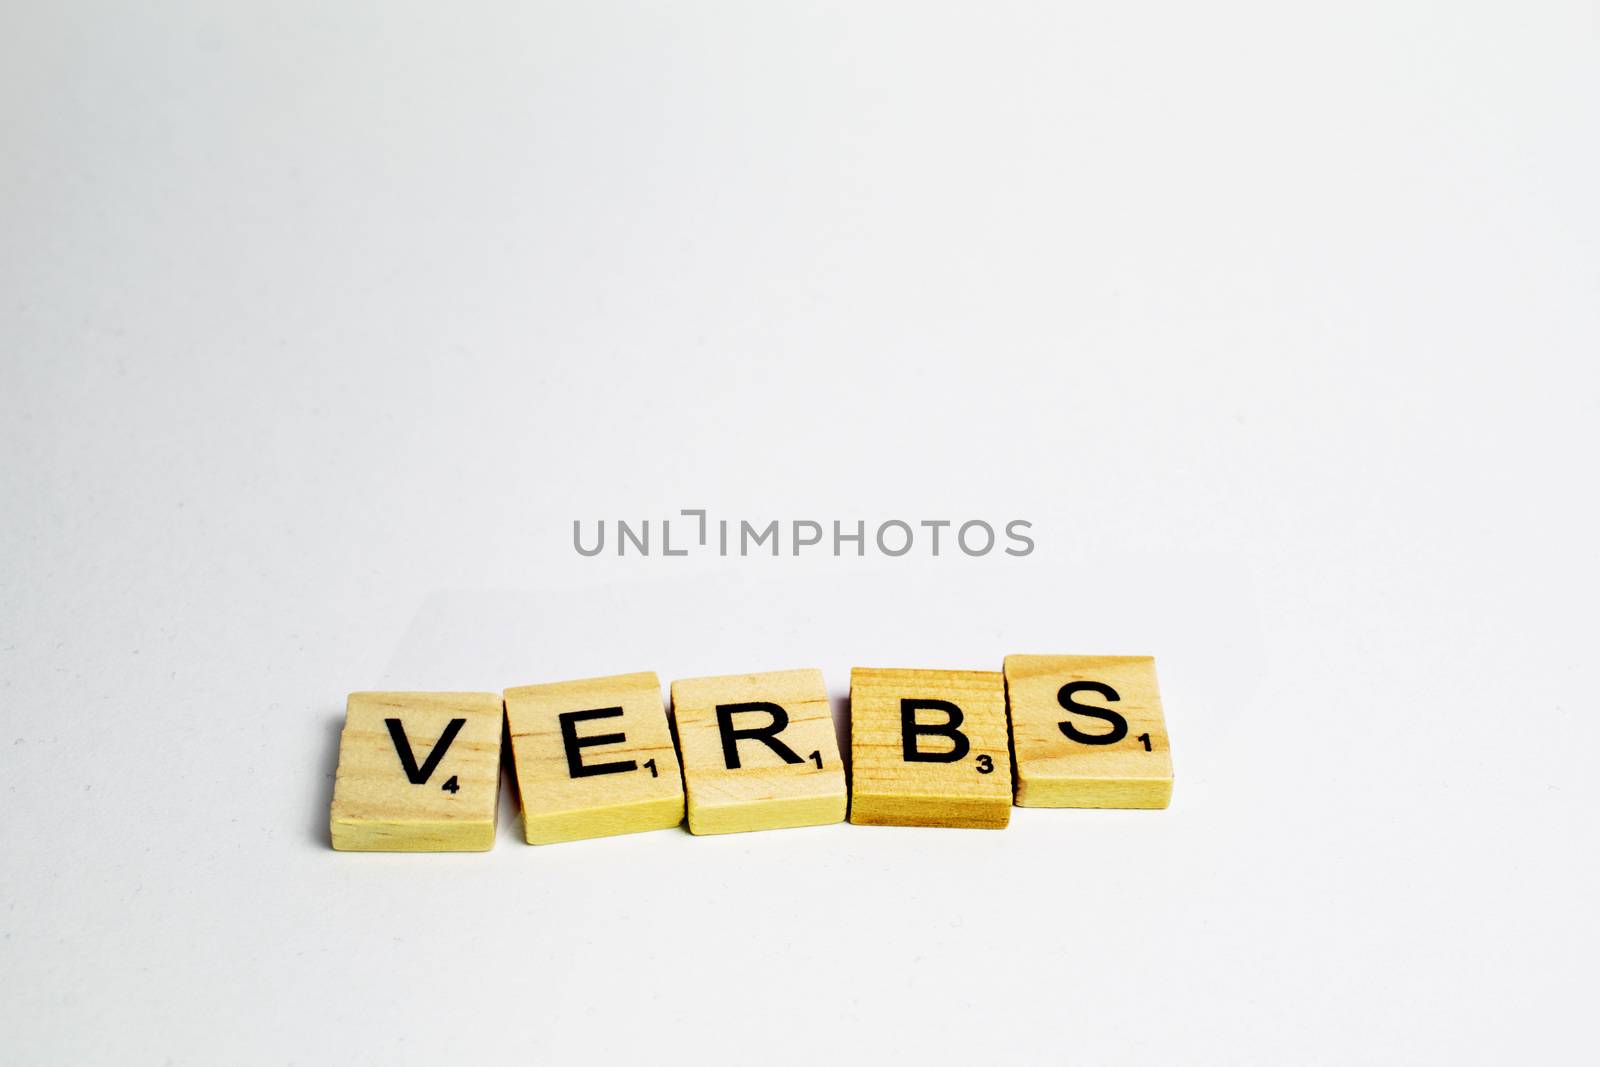 Scrabble tiles with word verbs written in a white background